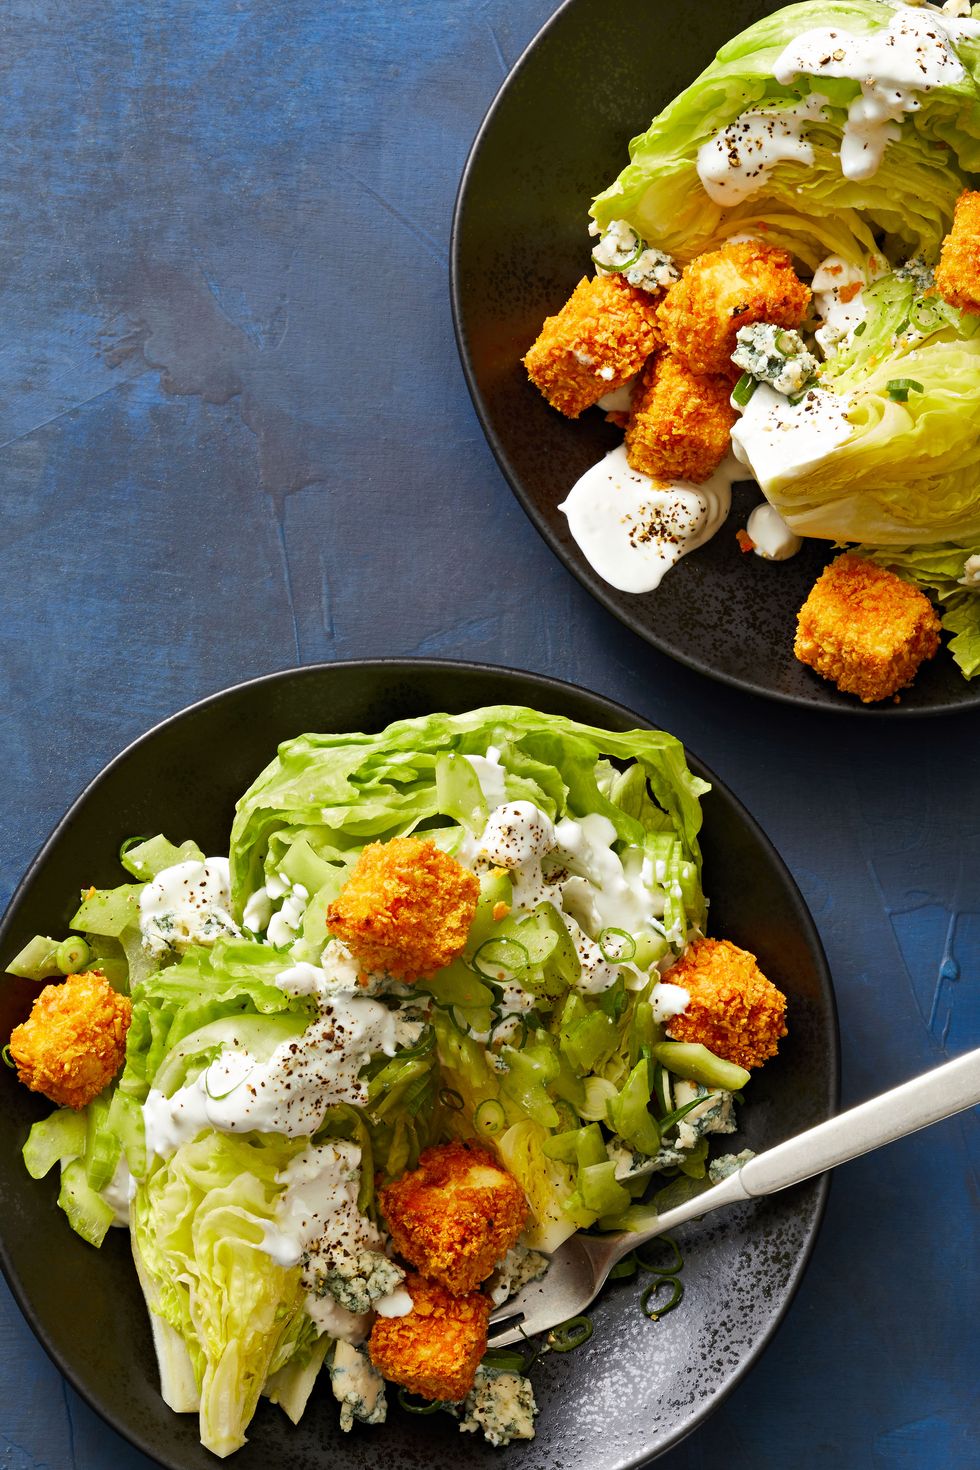 https://hips.hearstapps.com/hmg-prod/images/wedge-salads-with-buffalo-tofu-croutons-644ac3aa680df.jpg?crop=0.745xw:0.745xh;0.0990xw,0.0741xh&resize=980:*